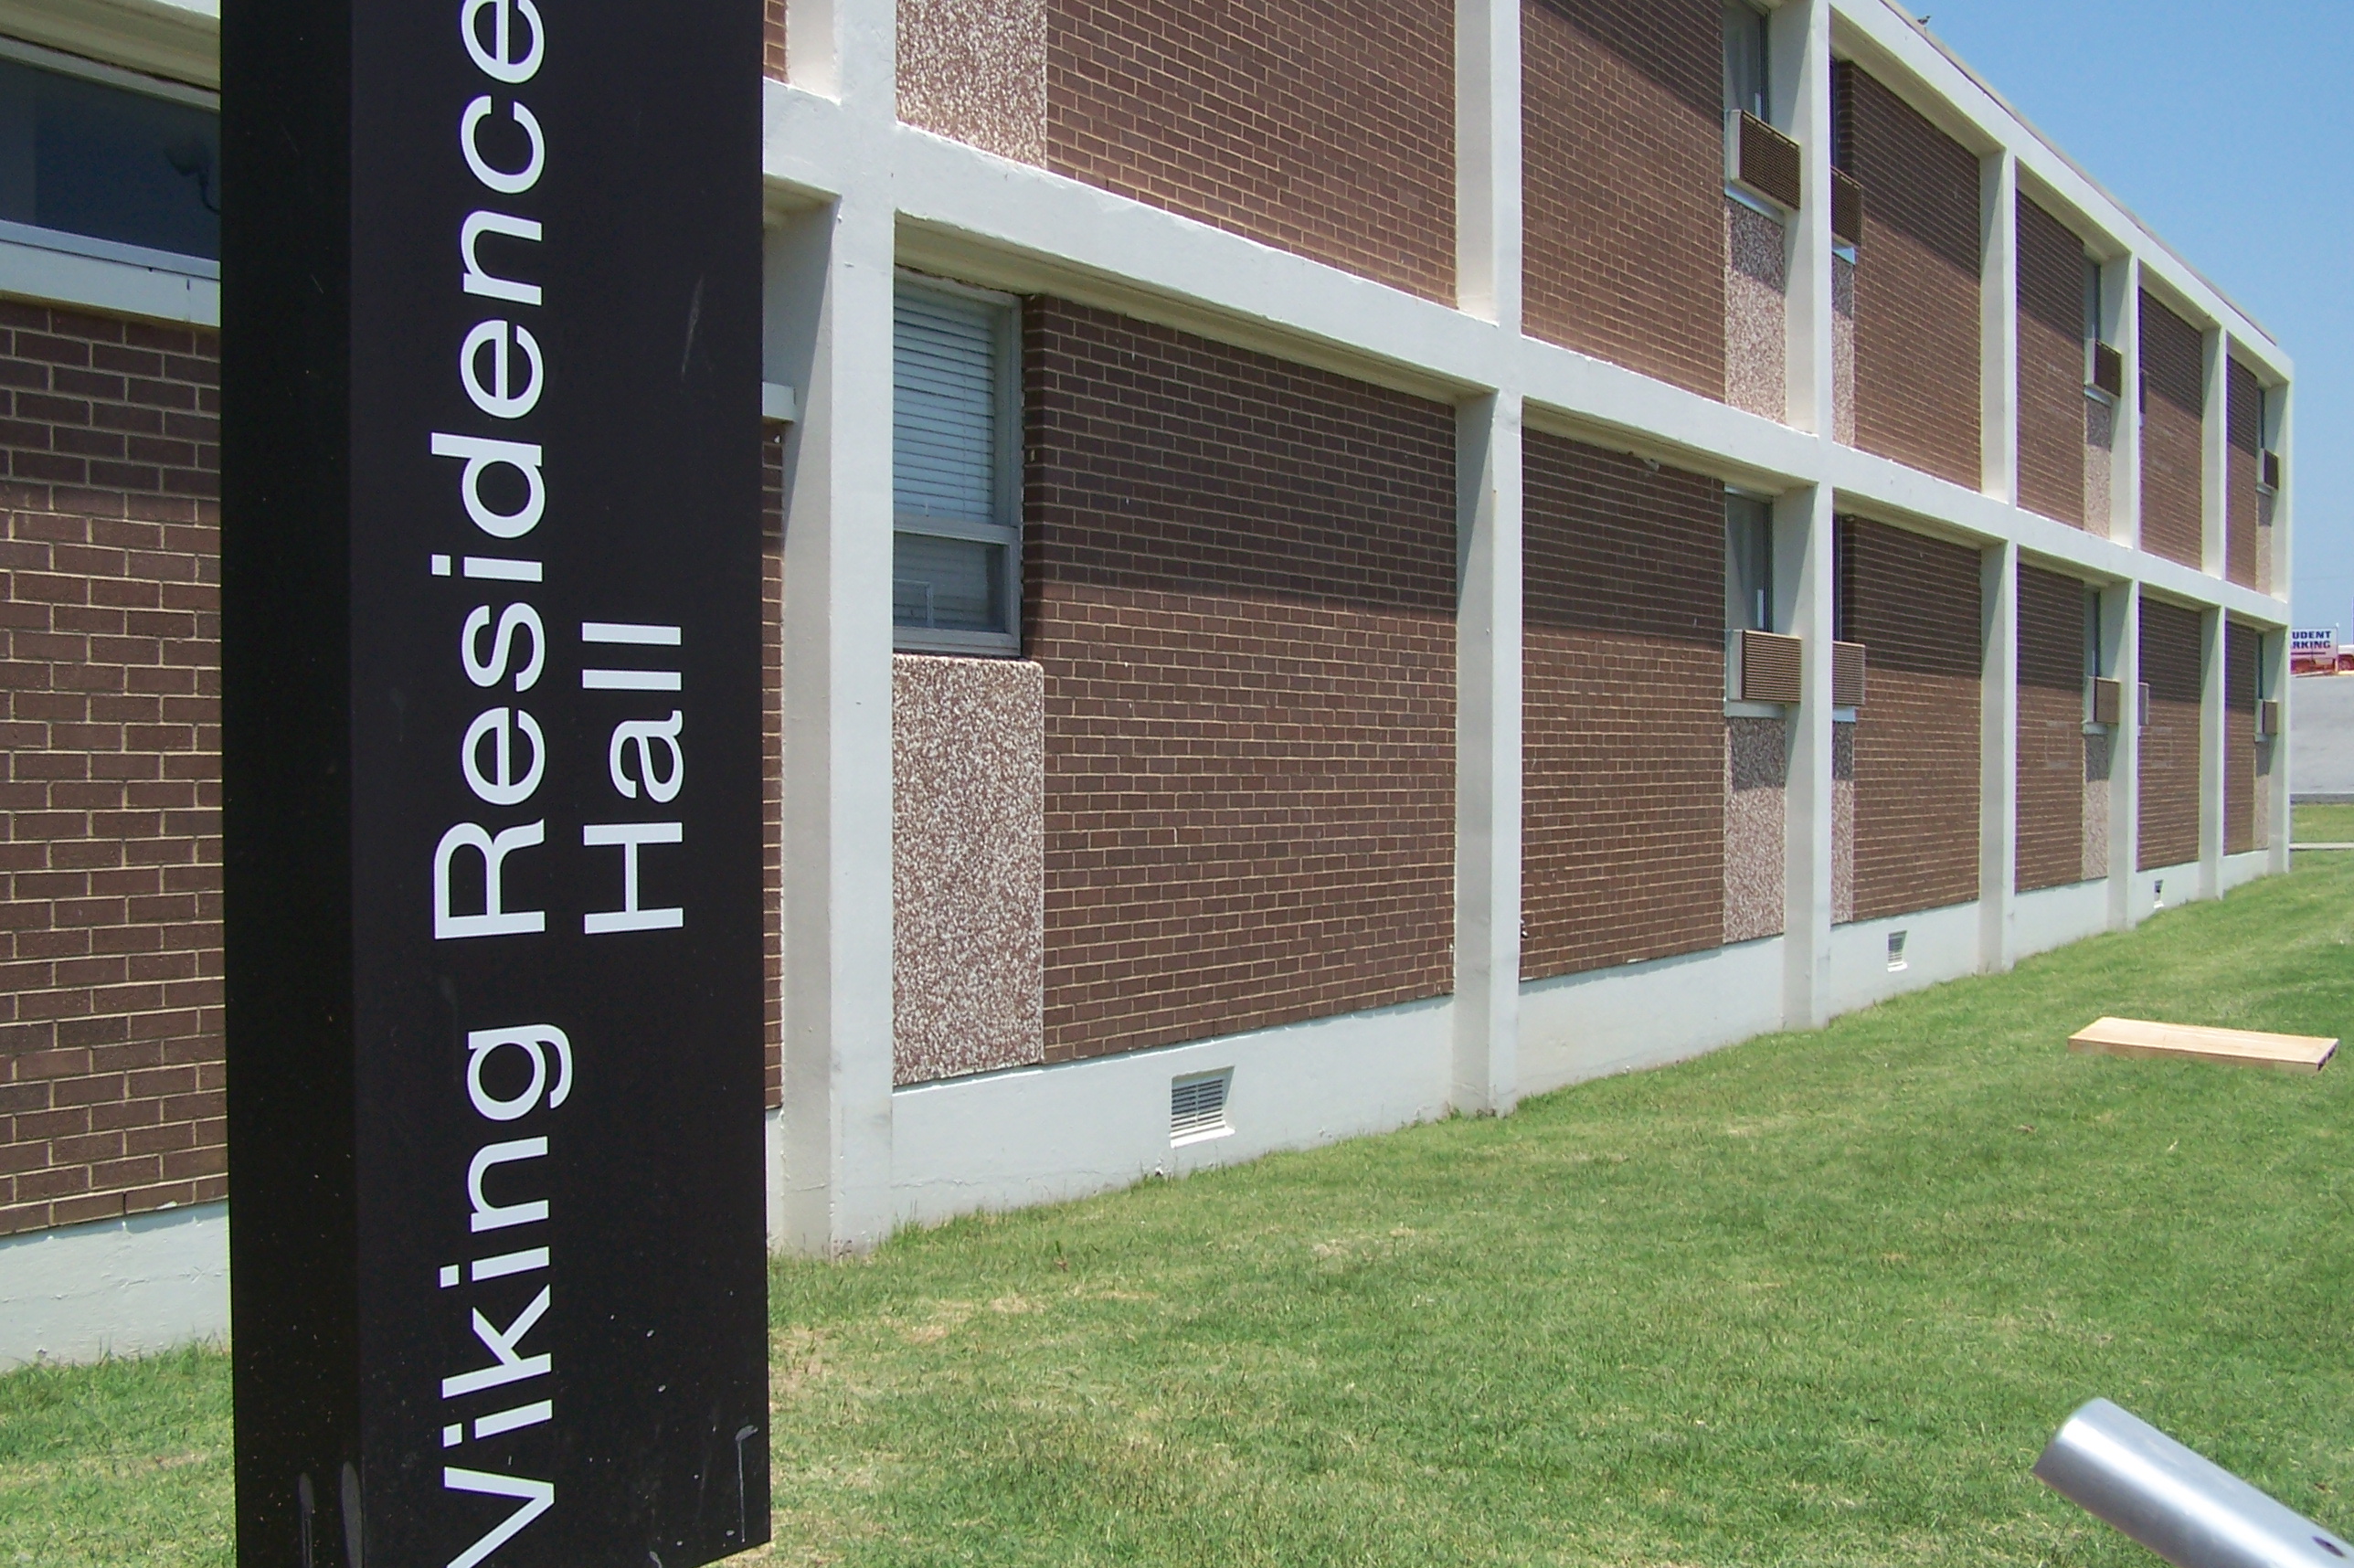 Viking Hall is centrally located to make on-campus living convenient.